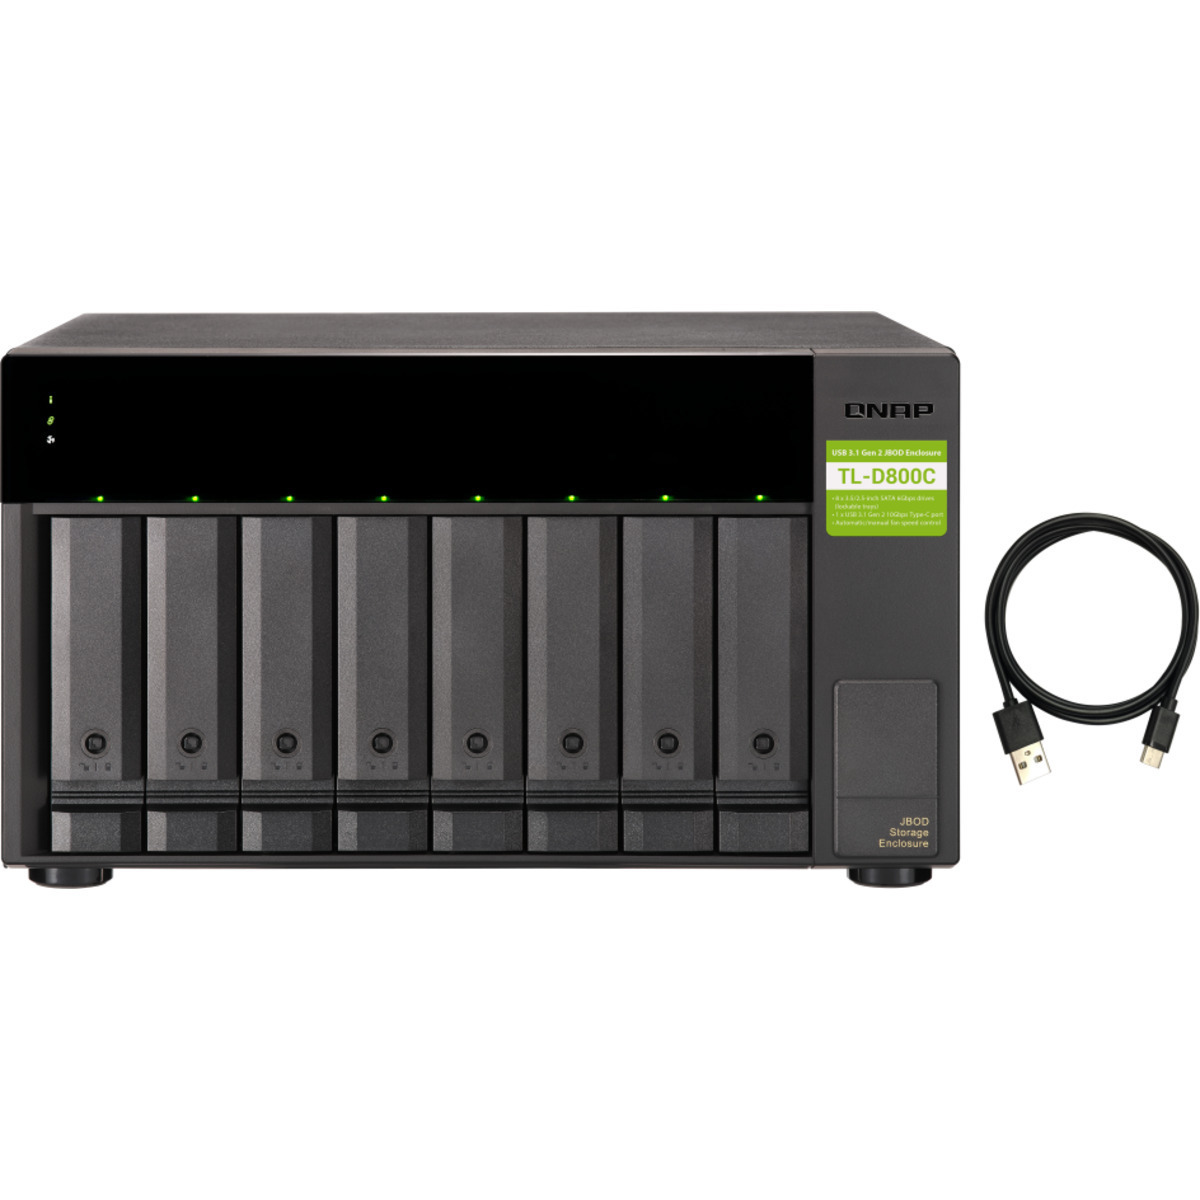 QNAP TL-D800C External Expansion Drive 2.5tb 8-Bay Desktop Multimedia / Power User / Business Expansion Enclosure 5x500gb Crucial MX500 CT500MX500SSD1 2.5 560/510MB/s SATA 6Gb/s SSD CONSUMER Class Drives Installed - Burn-In Tested TL-D800C External Expansion Drive